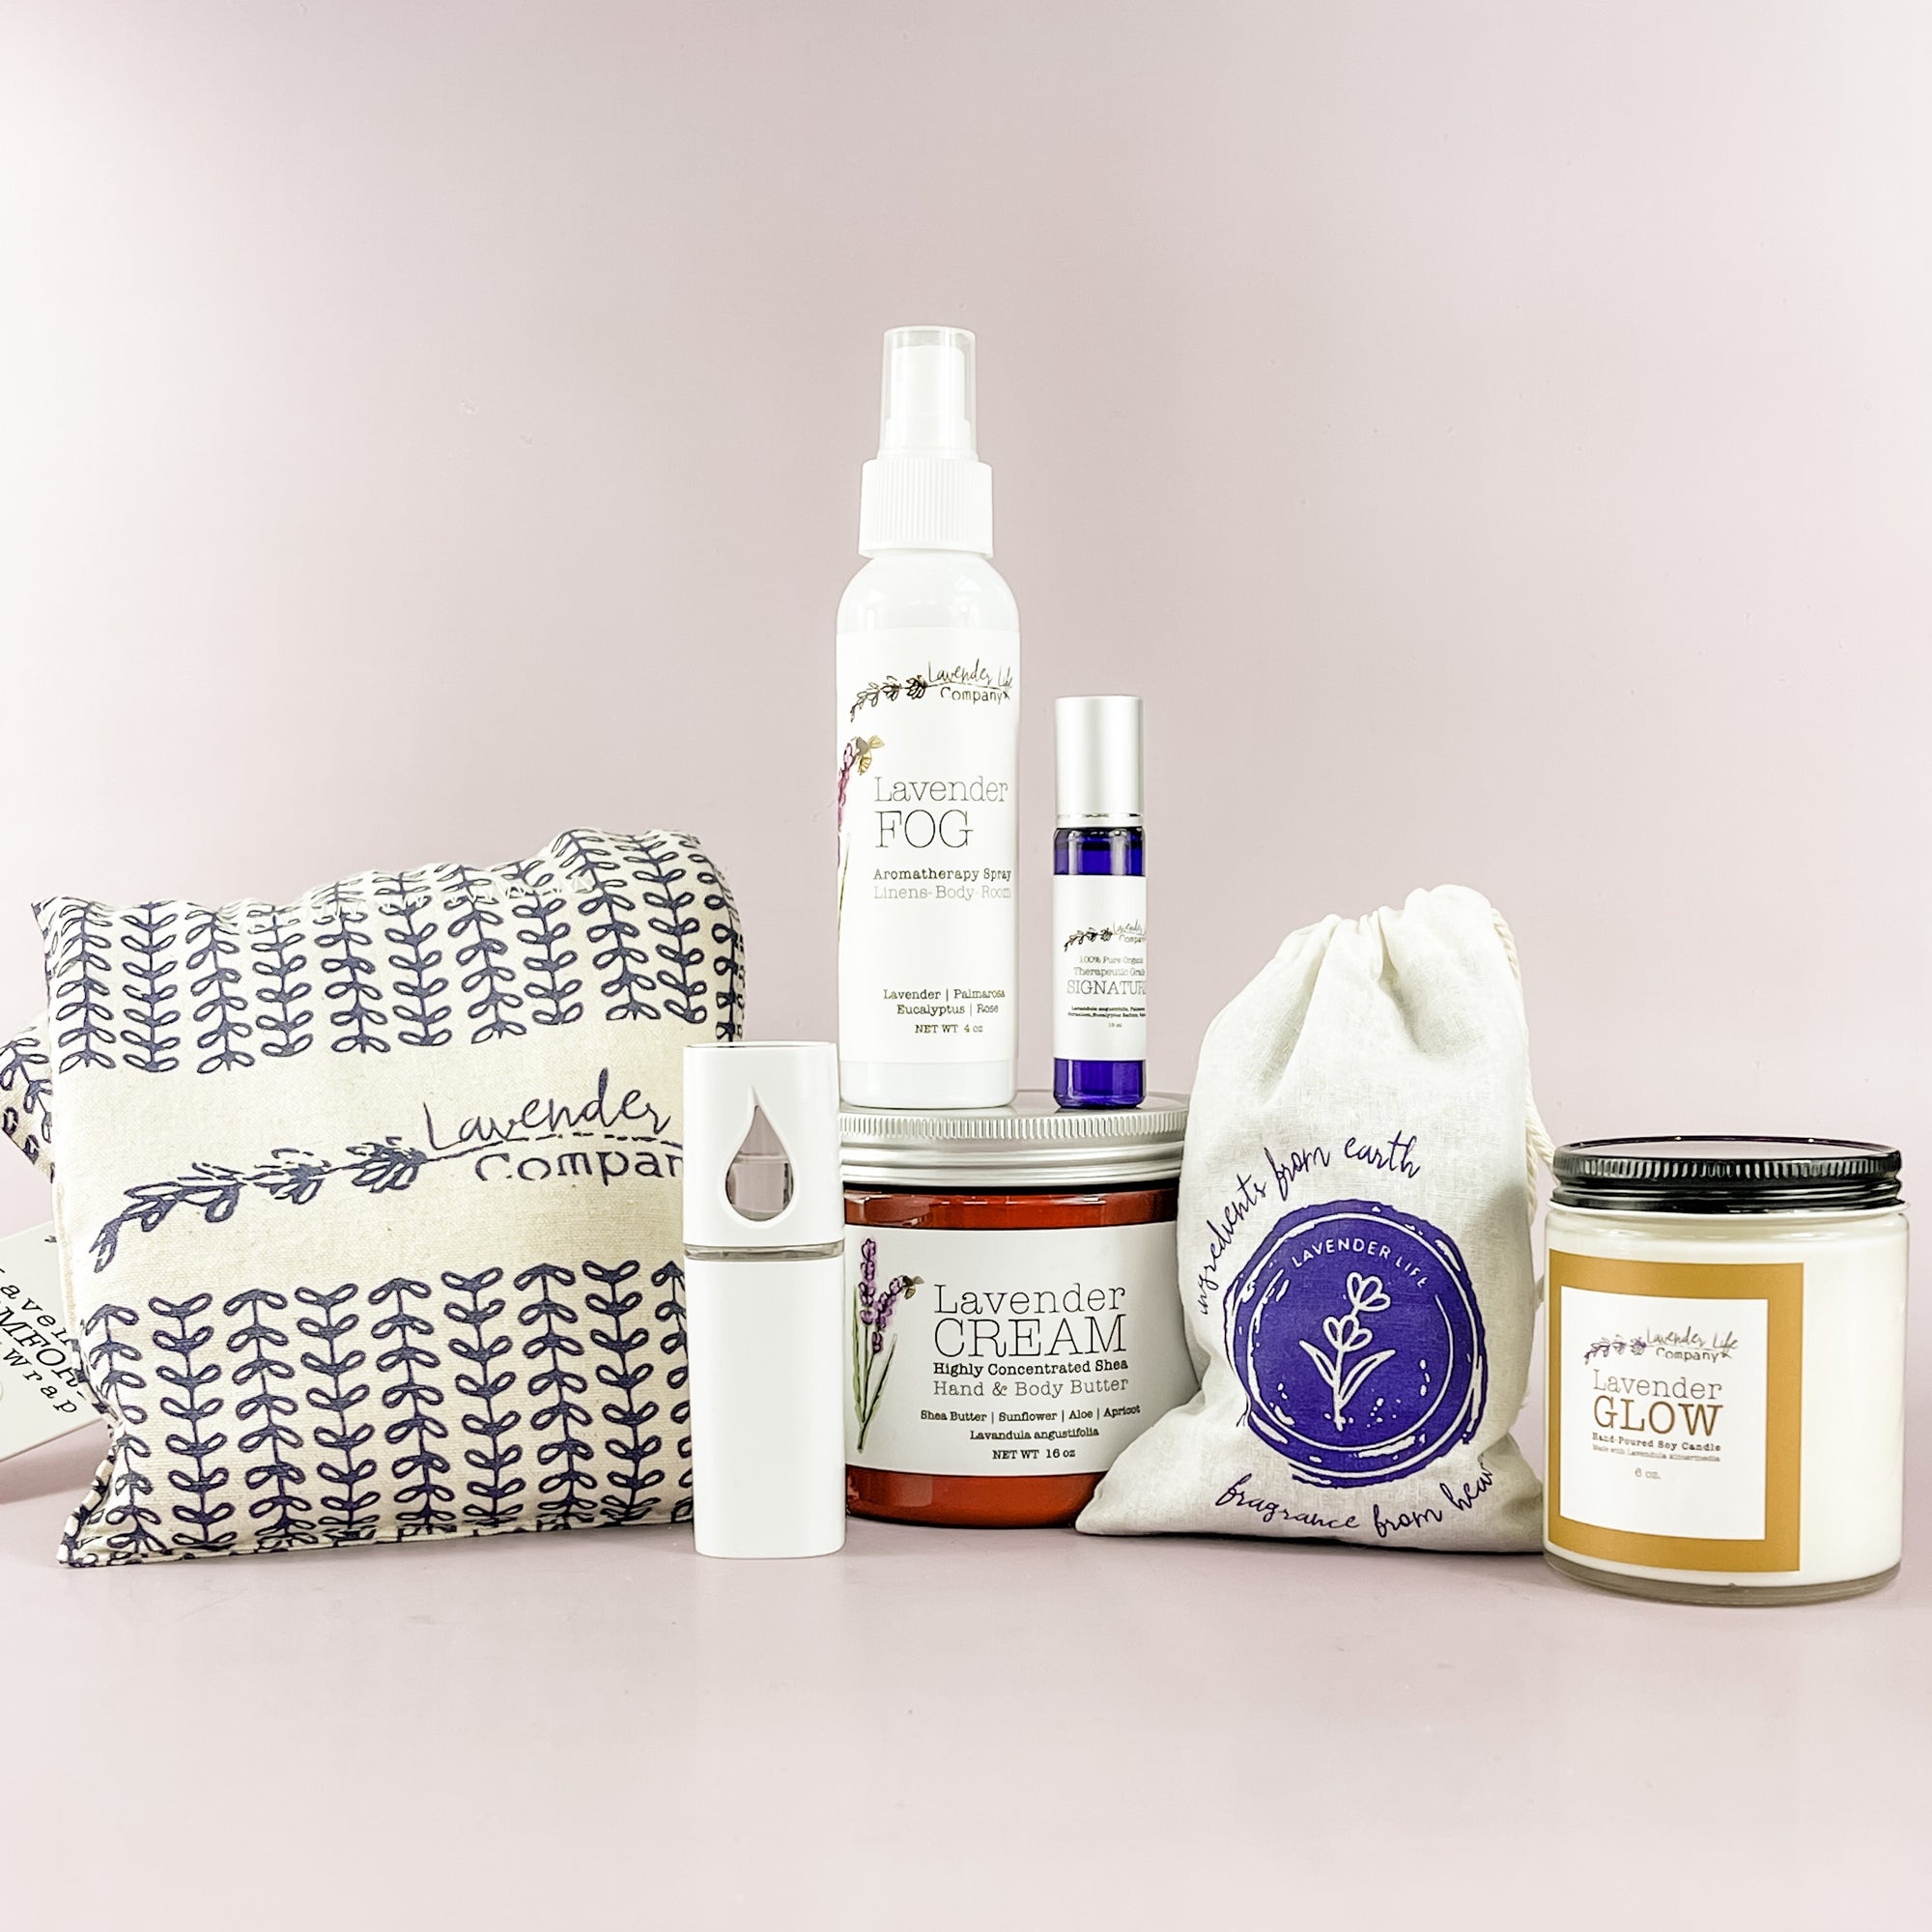 The Gift of Relaxation: Lavender Bath and Body Products